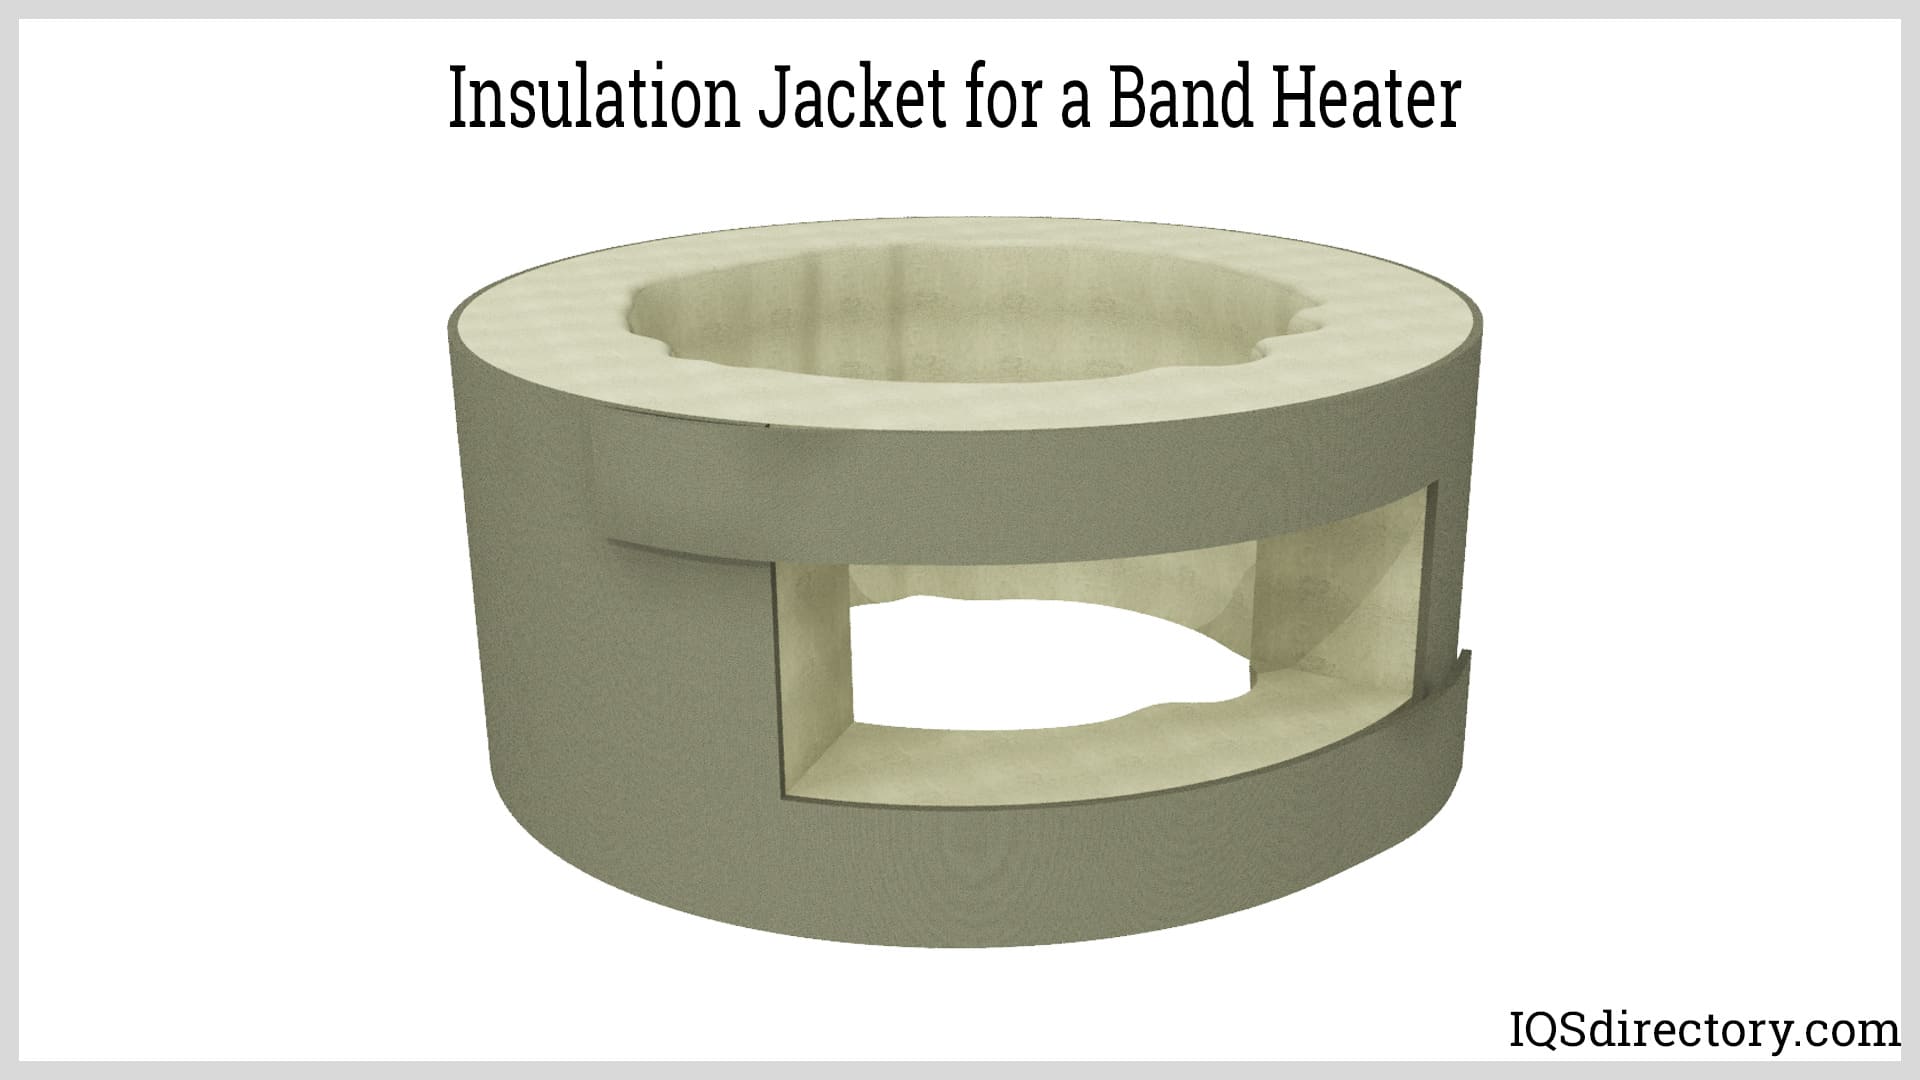 Insulation Jacket for a Band Heater